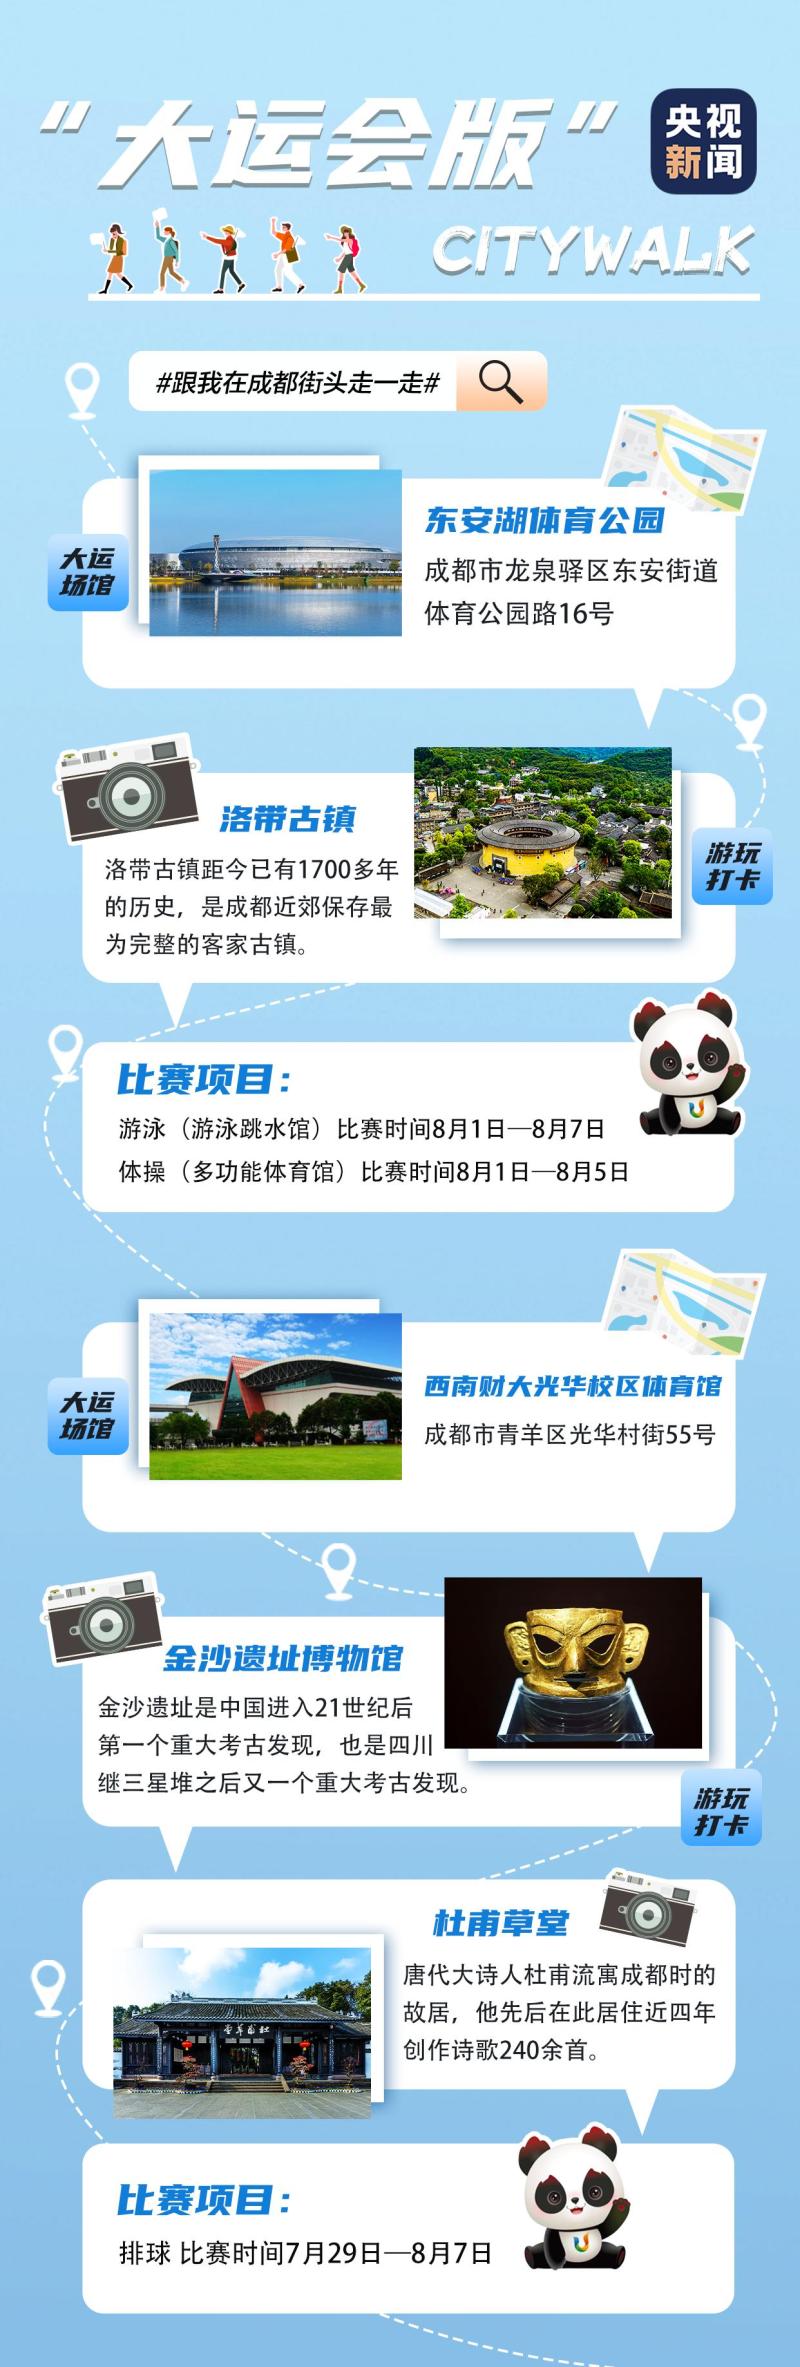 Take a walk on the streets of Chengdu~Universiade version of Citywalk! Sports | Chengdu | Universiade